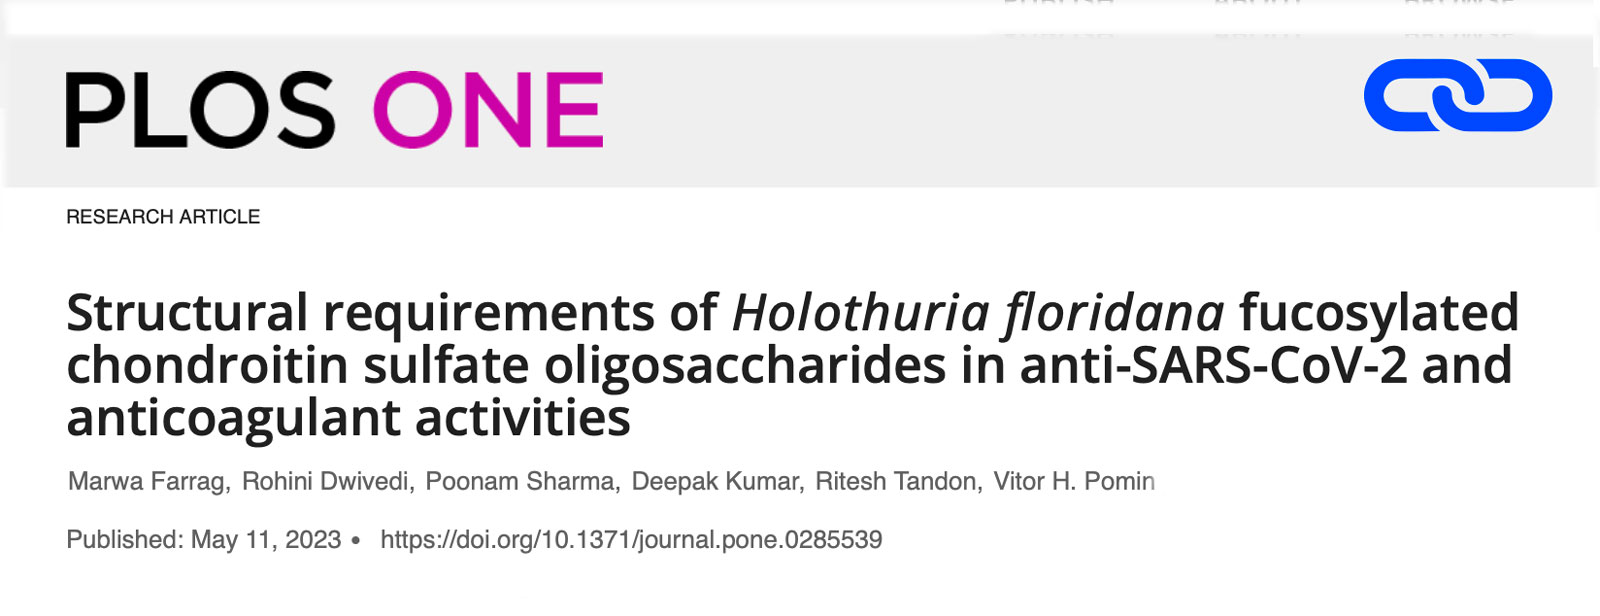 Structural requirements of Holothuria floridana fucosylated chondroitin sulfate oligosaccharides in anti-SARS-CoV-2 and anticoagulant activities